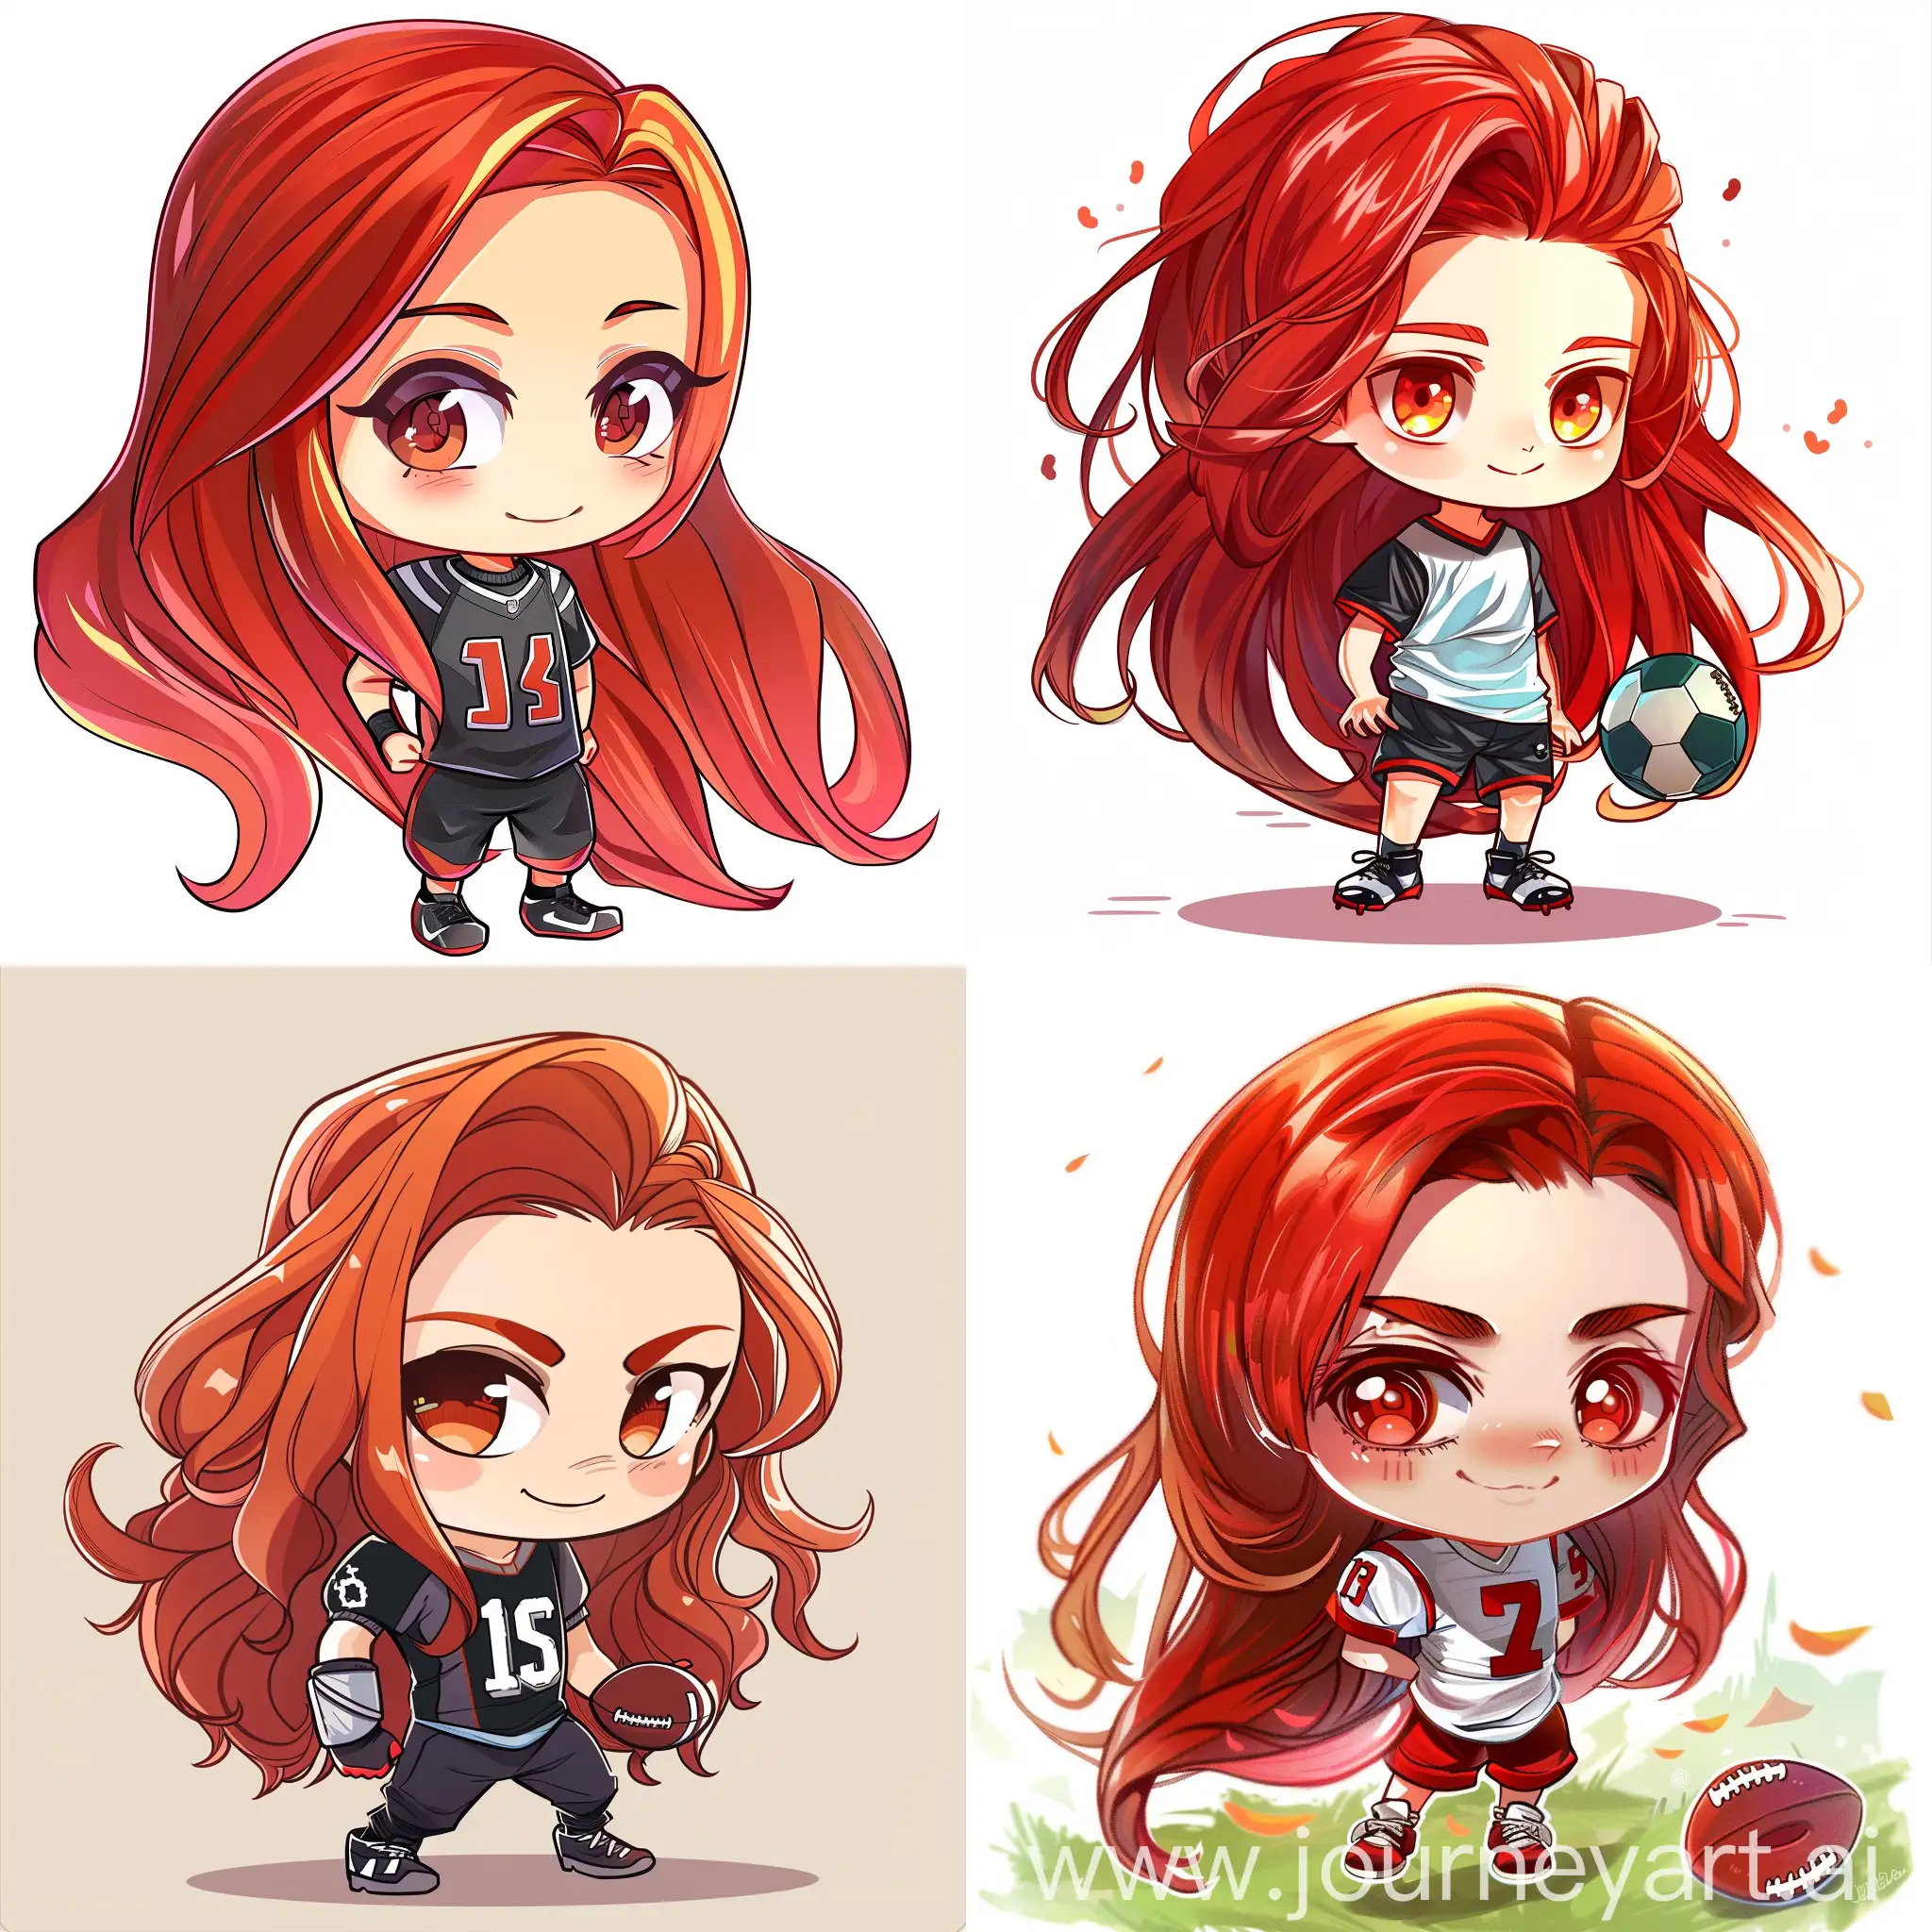 Chibi-Style-Football-Player-Boy-with-Long-Red-Hair